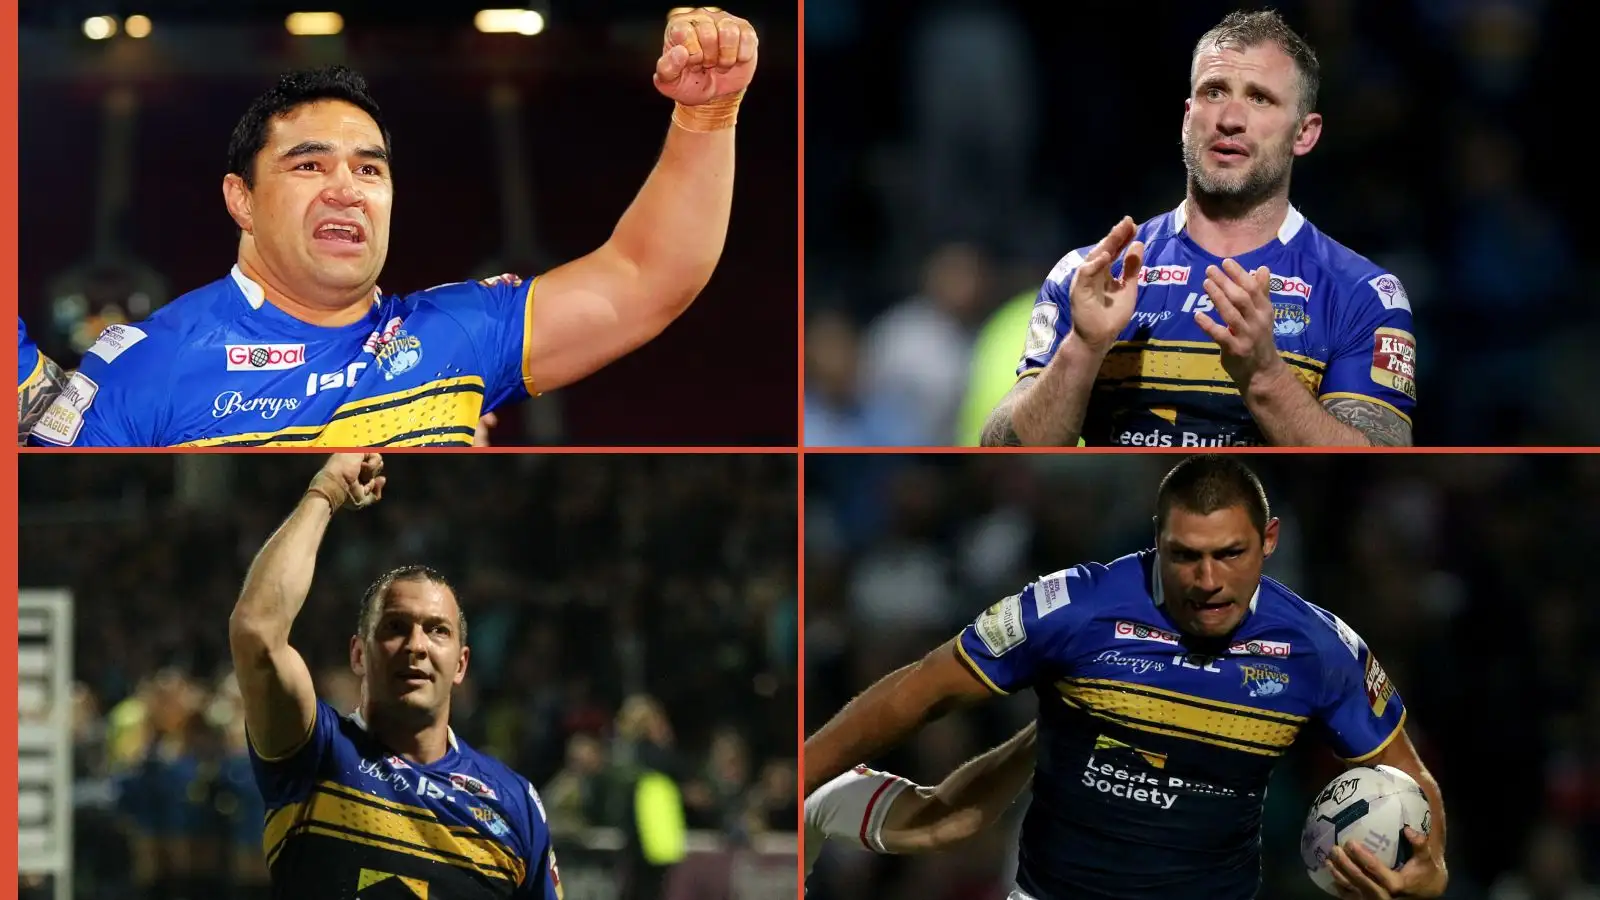 Where Are They Now? The Leeds Rhinos side from that Ryan Hall game against Huddersfield Giants in 2015